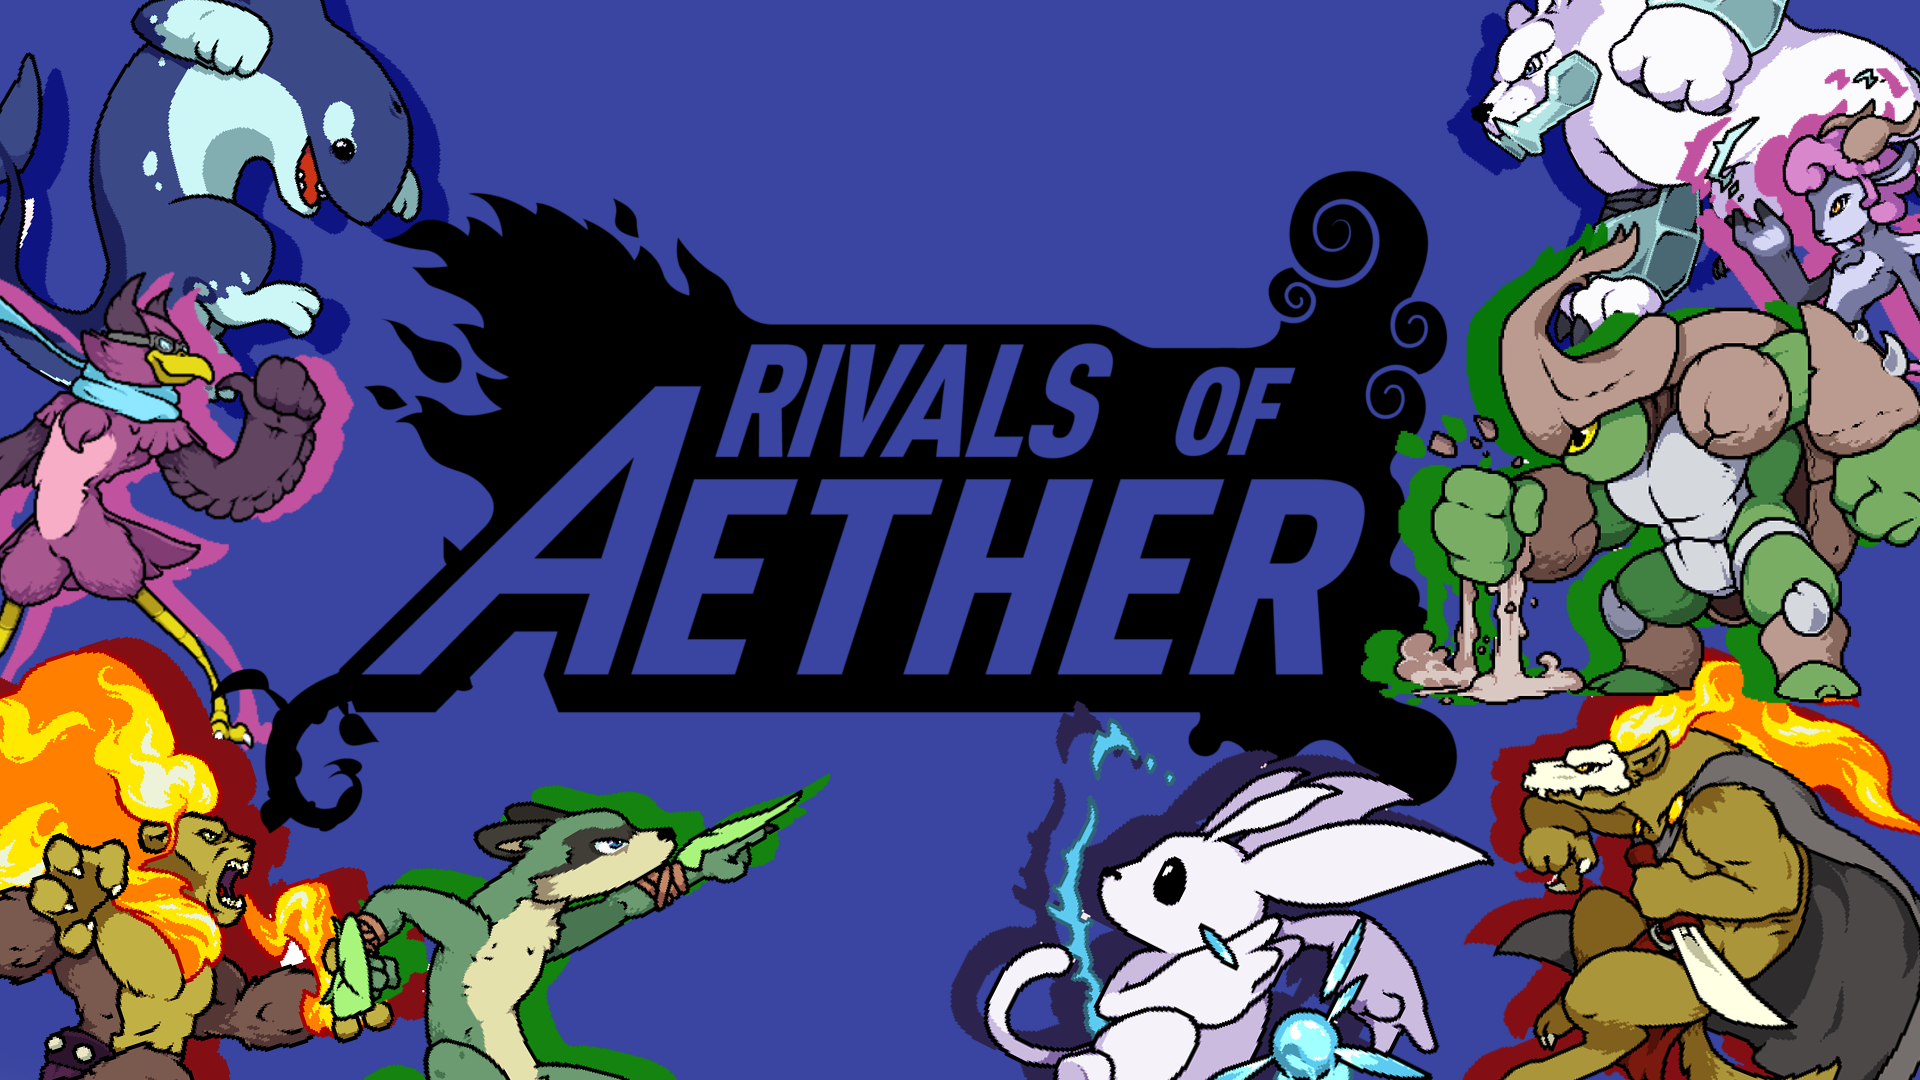 rivals of aether all dlc free download